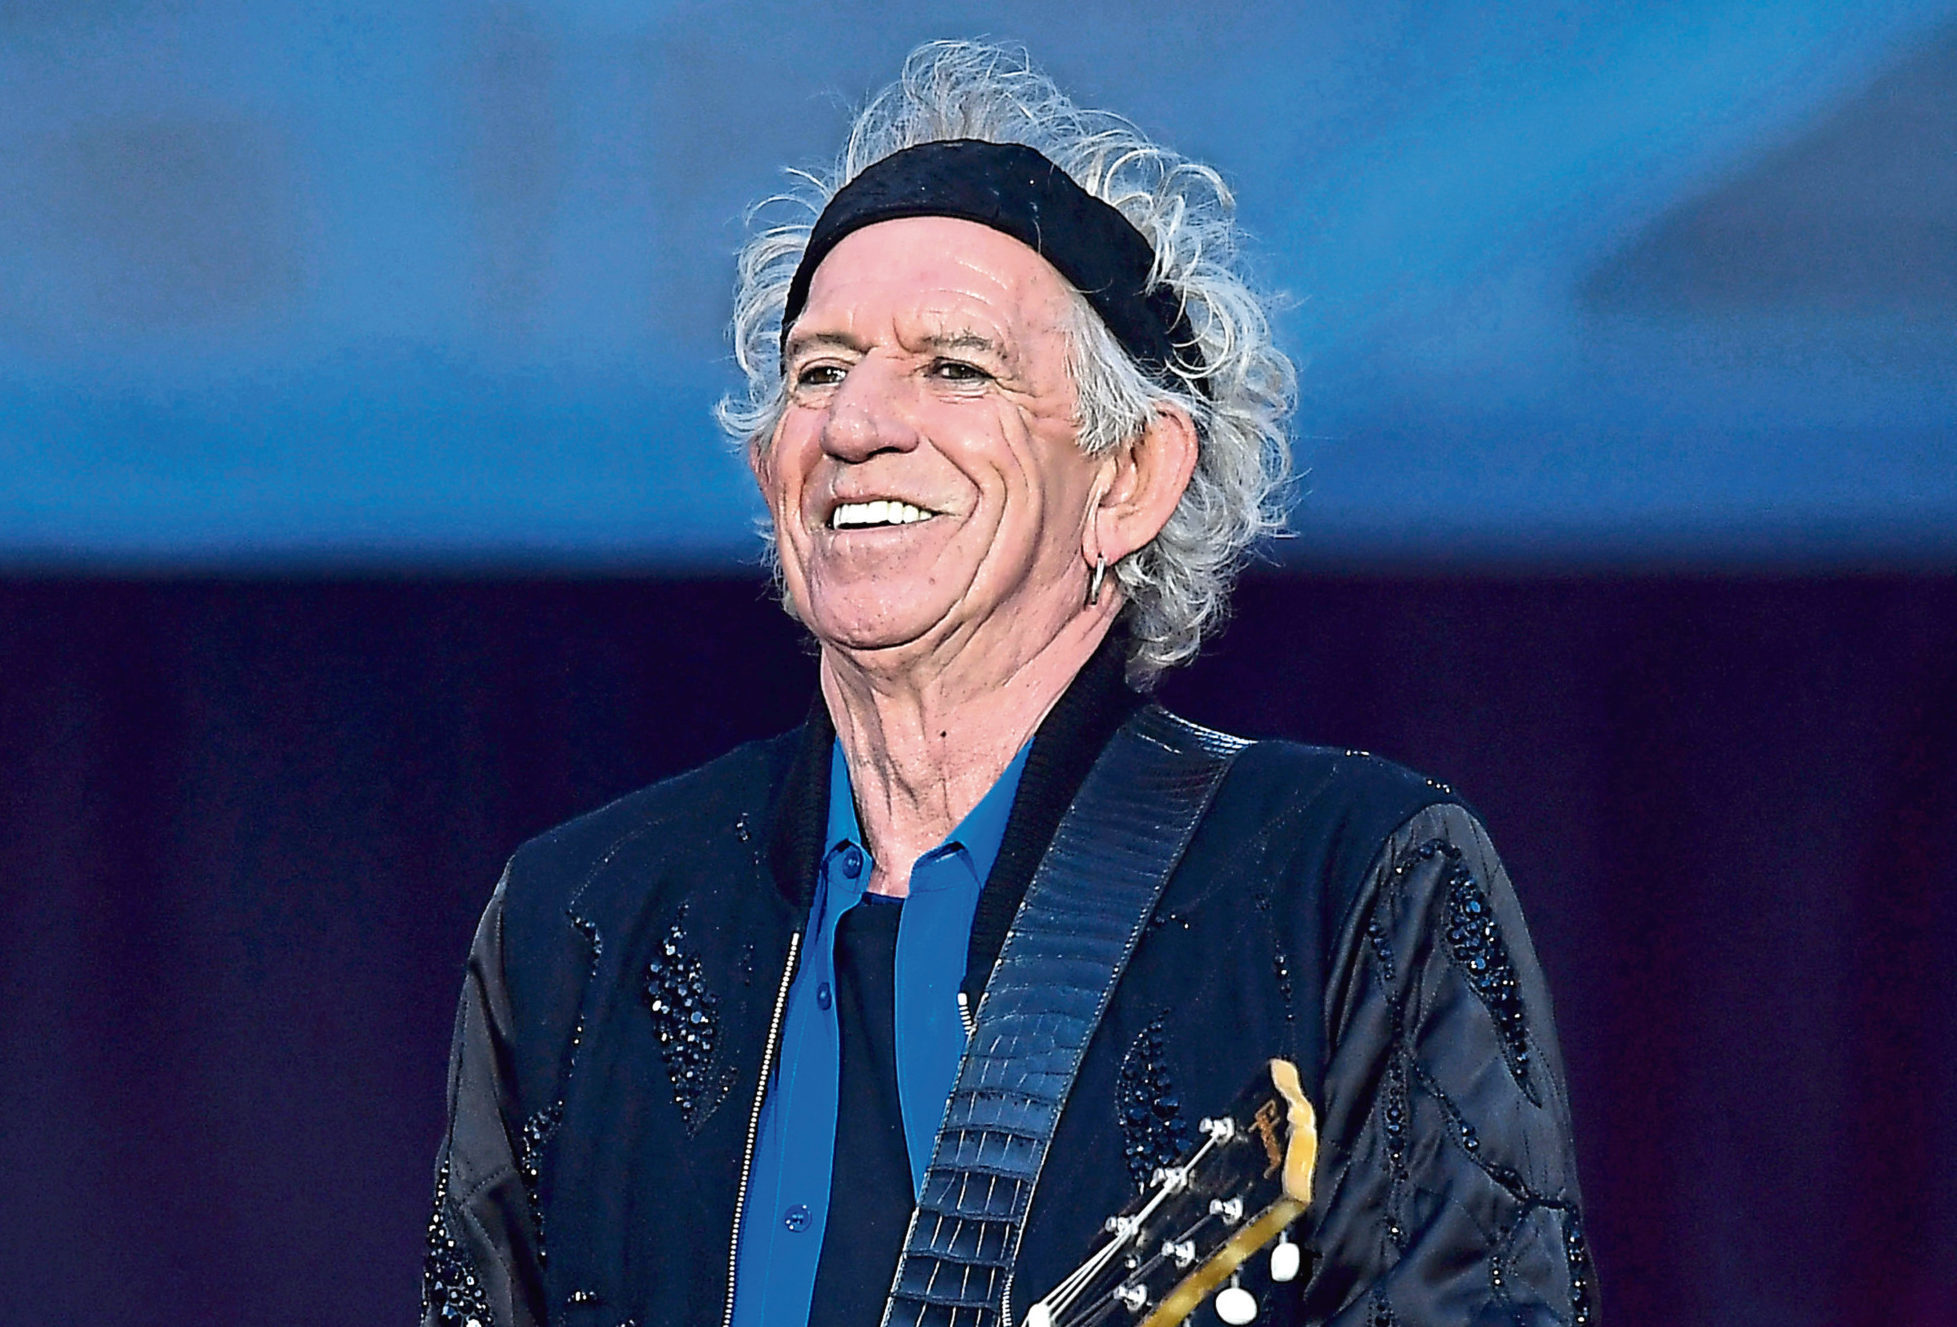 Keith Richards of The Rolling Stones (Charles McQuillan/Getty Images)